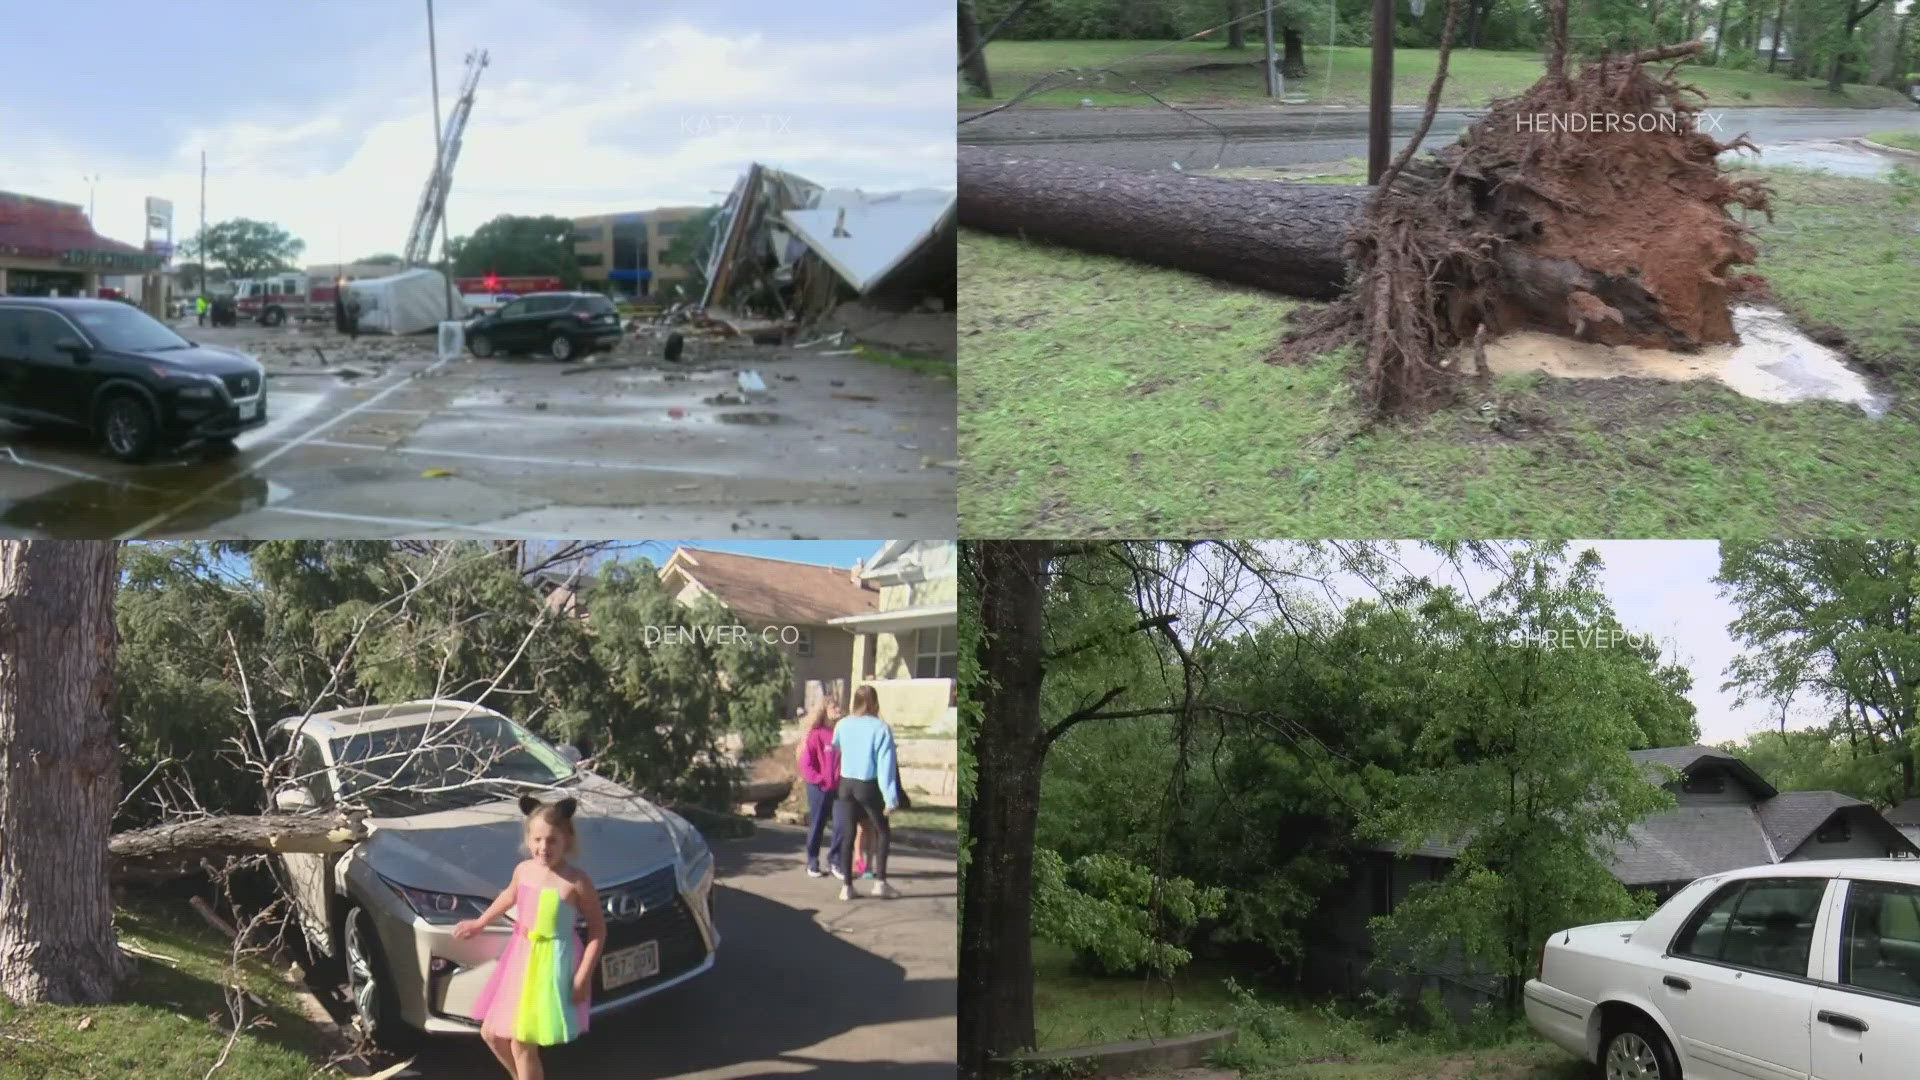 WFMY News 2 digs into severe weather across the United States and the history of April storms in North Carolina.